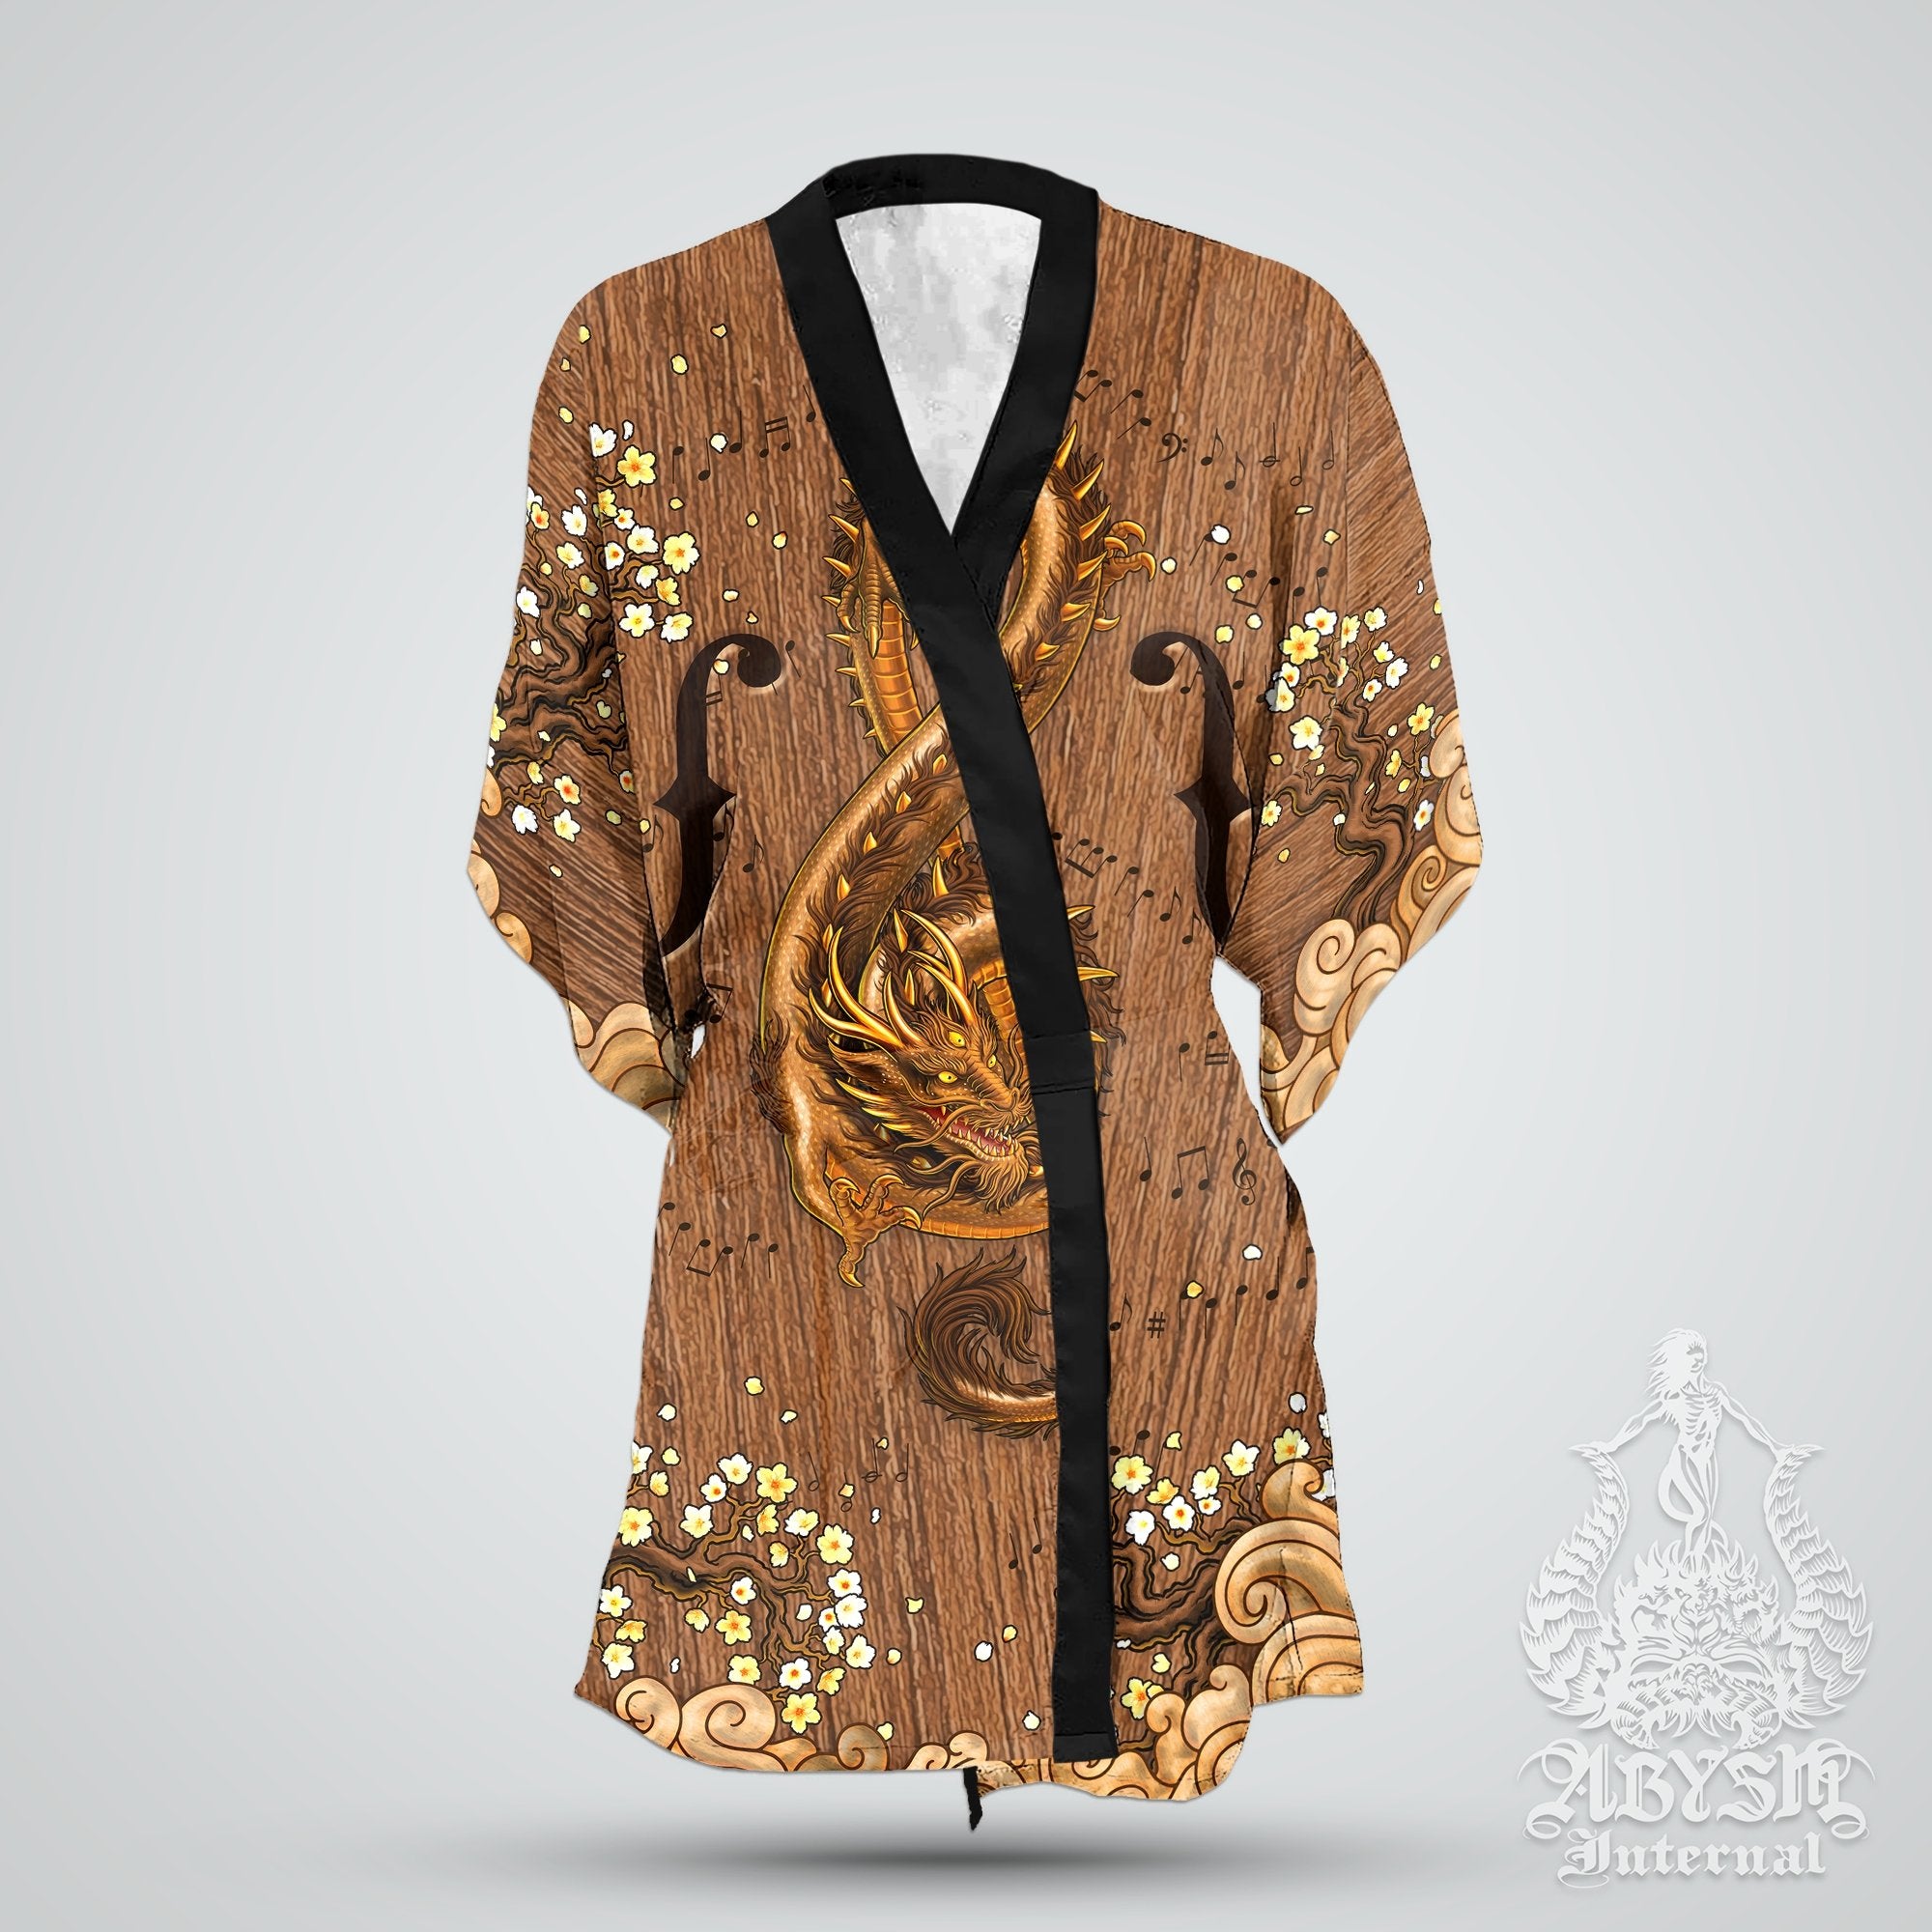 Music Cover Up, Beach Outfit, Party Kimono, Summer Festival Robe, Boho Indie and Alternative Clothing, Unisex - Dragon, Wood - Abysm Internal